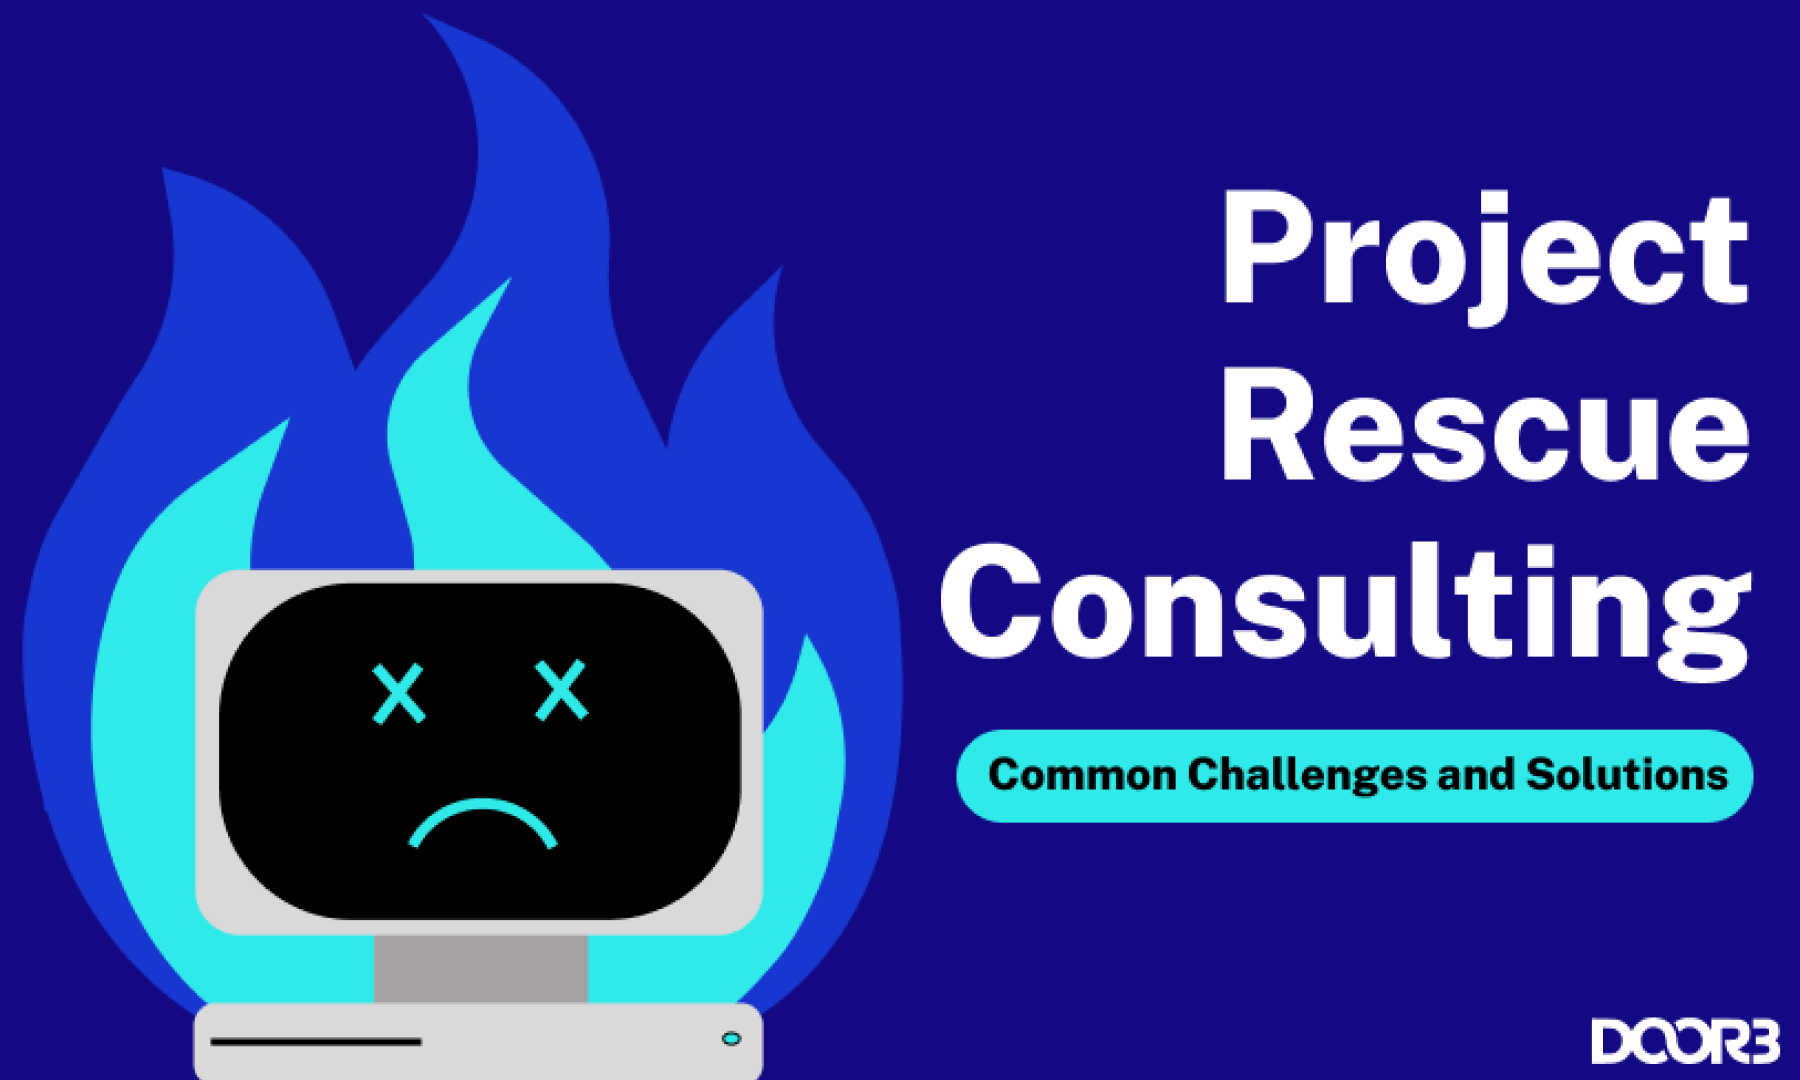 Project Rescue Consulting: Common Challenges and Solutions